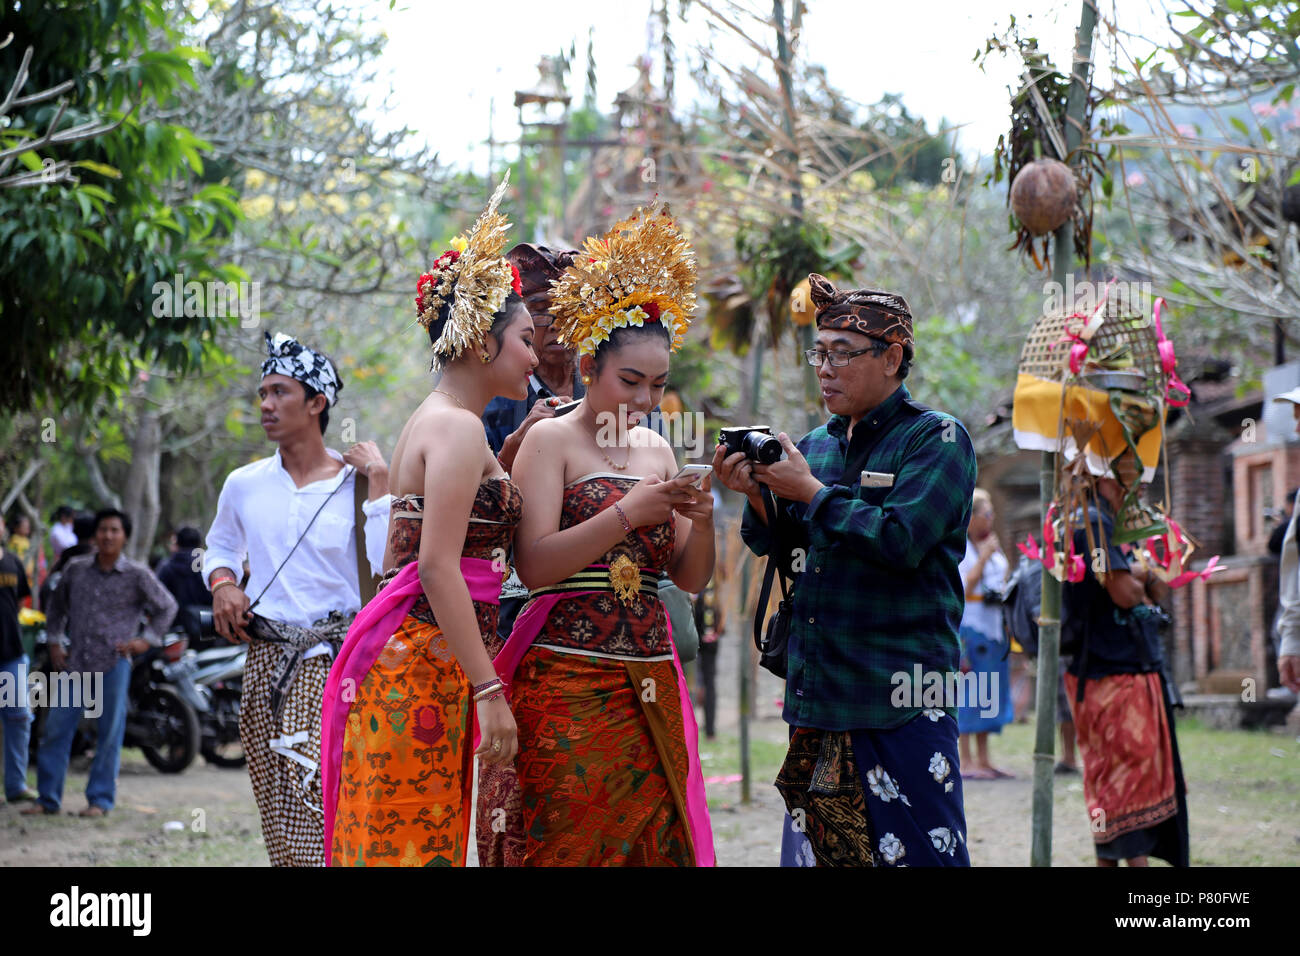 Tenganan, Indonesia – June 30 2018: Two local girls with ornate gold head-dresses gather around a mobile phone in the village of Tenganan, Bali during Stock Photo